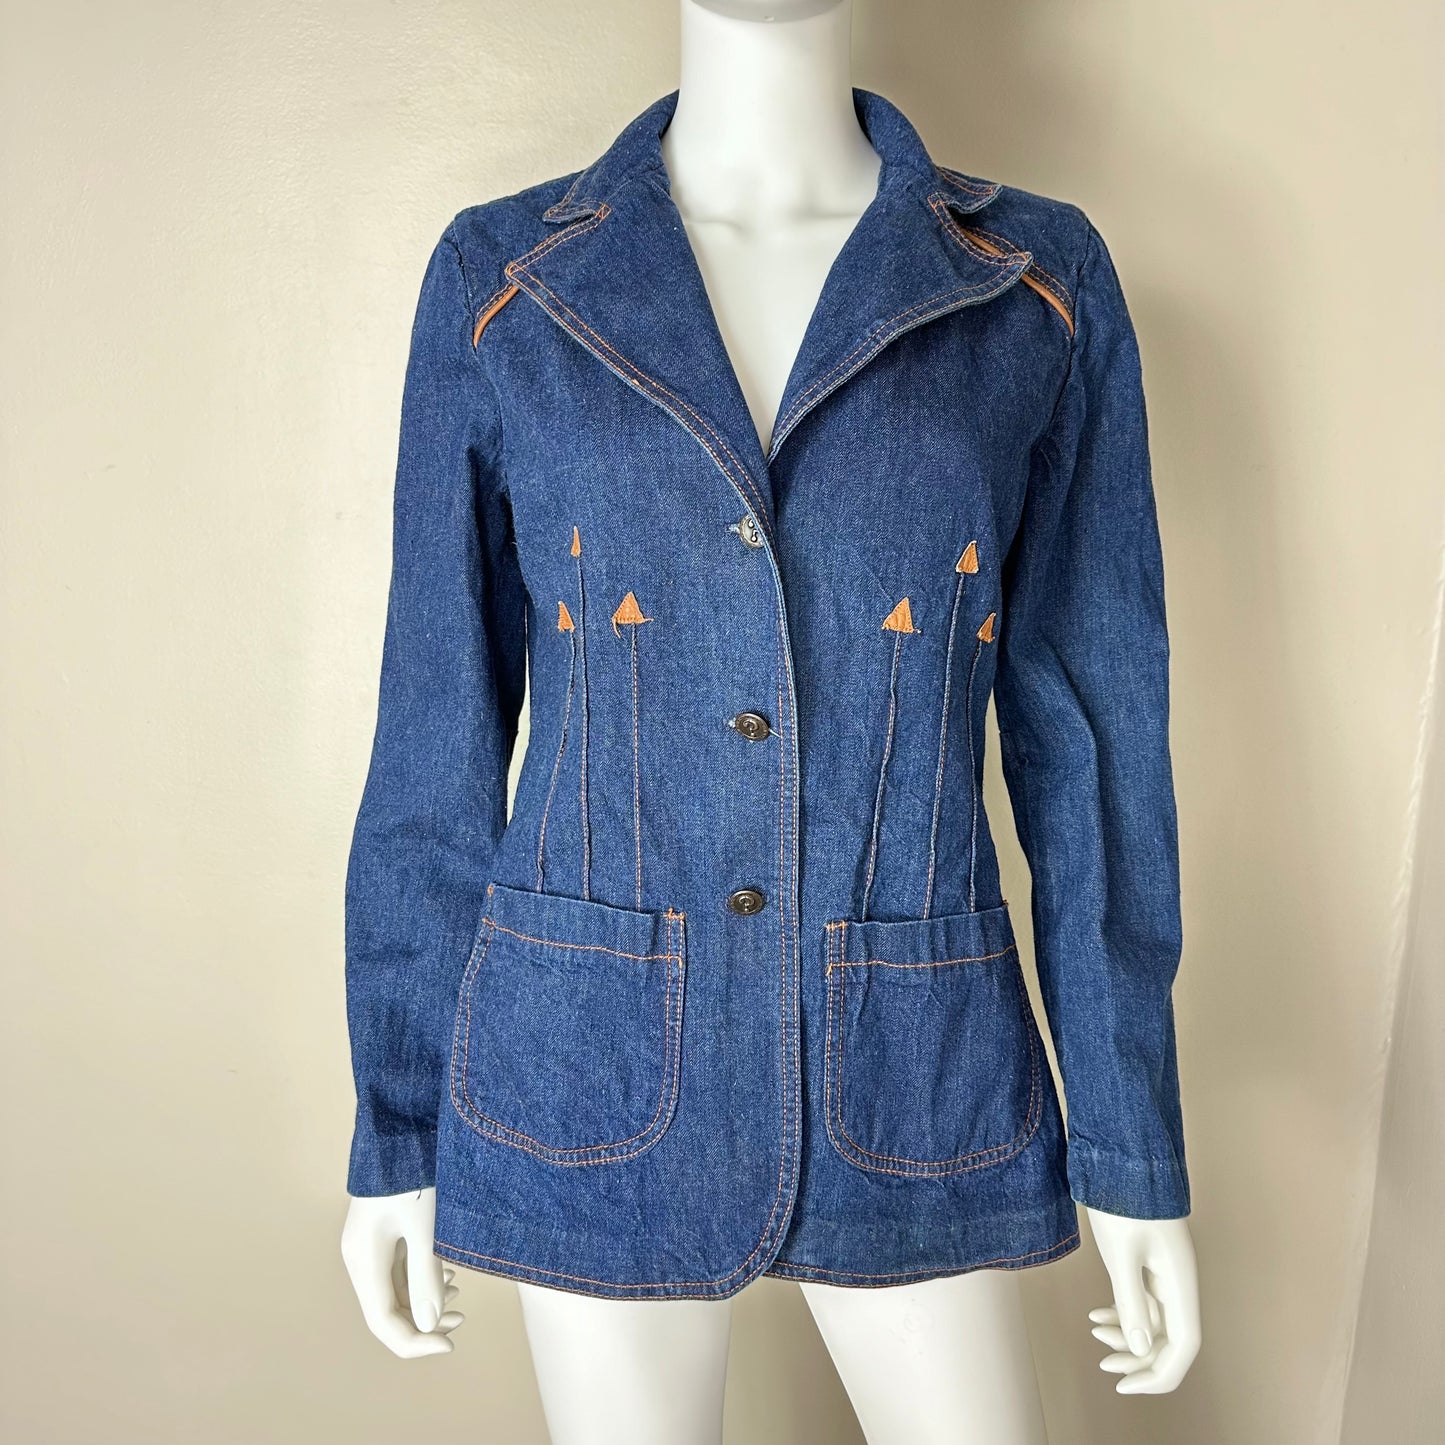 1970s Denim Blazer Jacket with Leather Trim, What’s in a Name? Size S-M